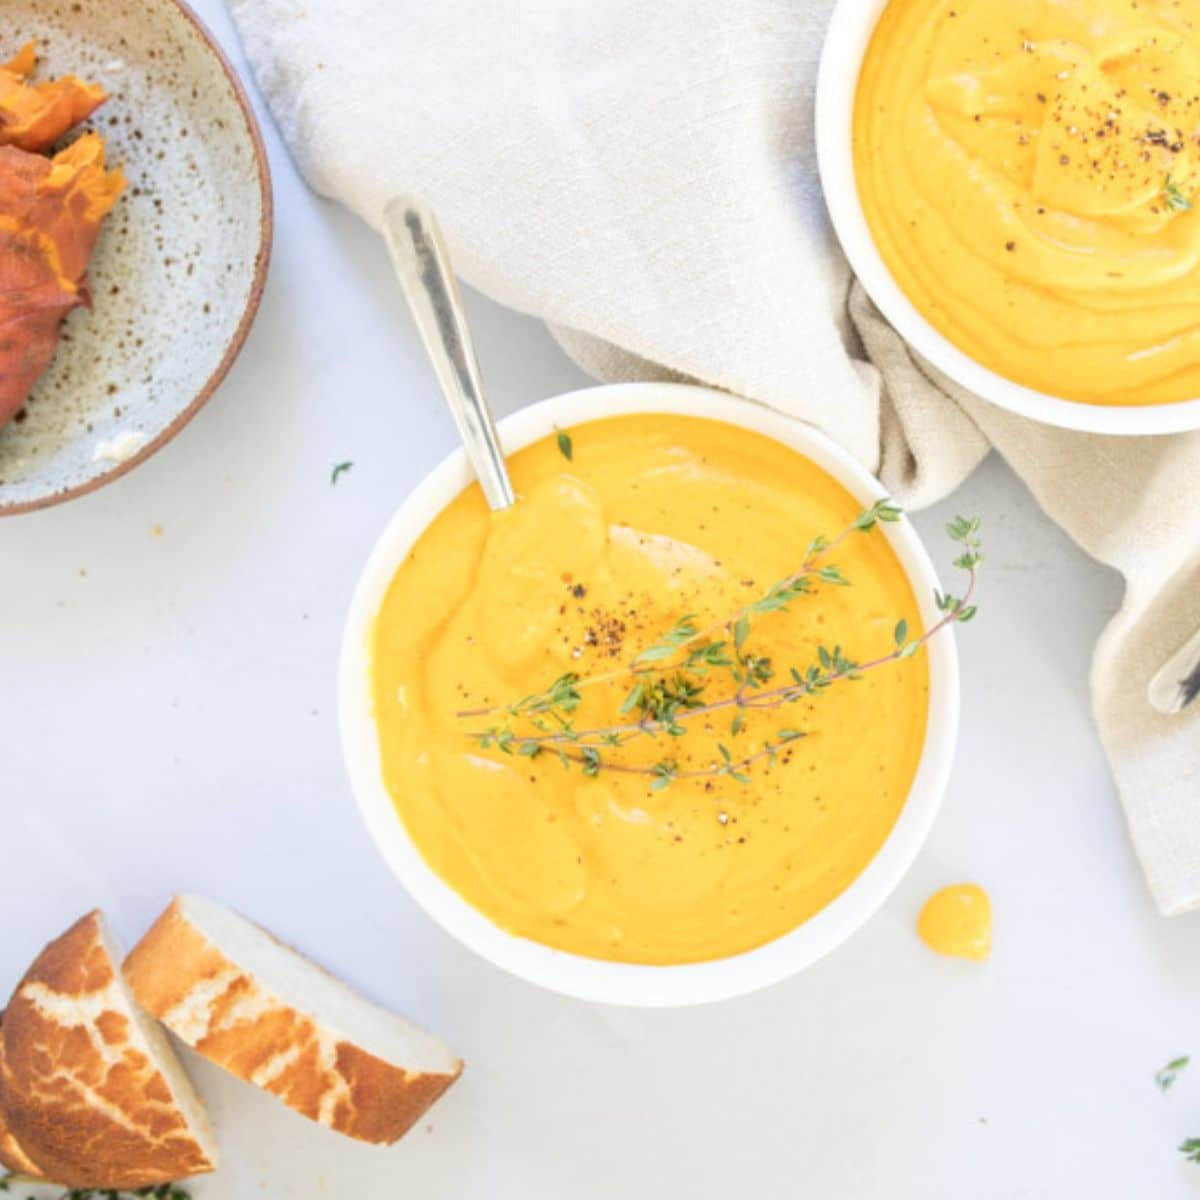 bowl of sweet potato soup with thyme garnish